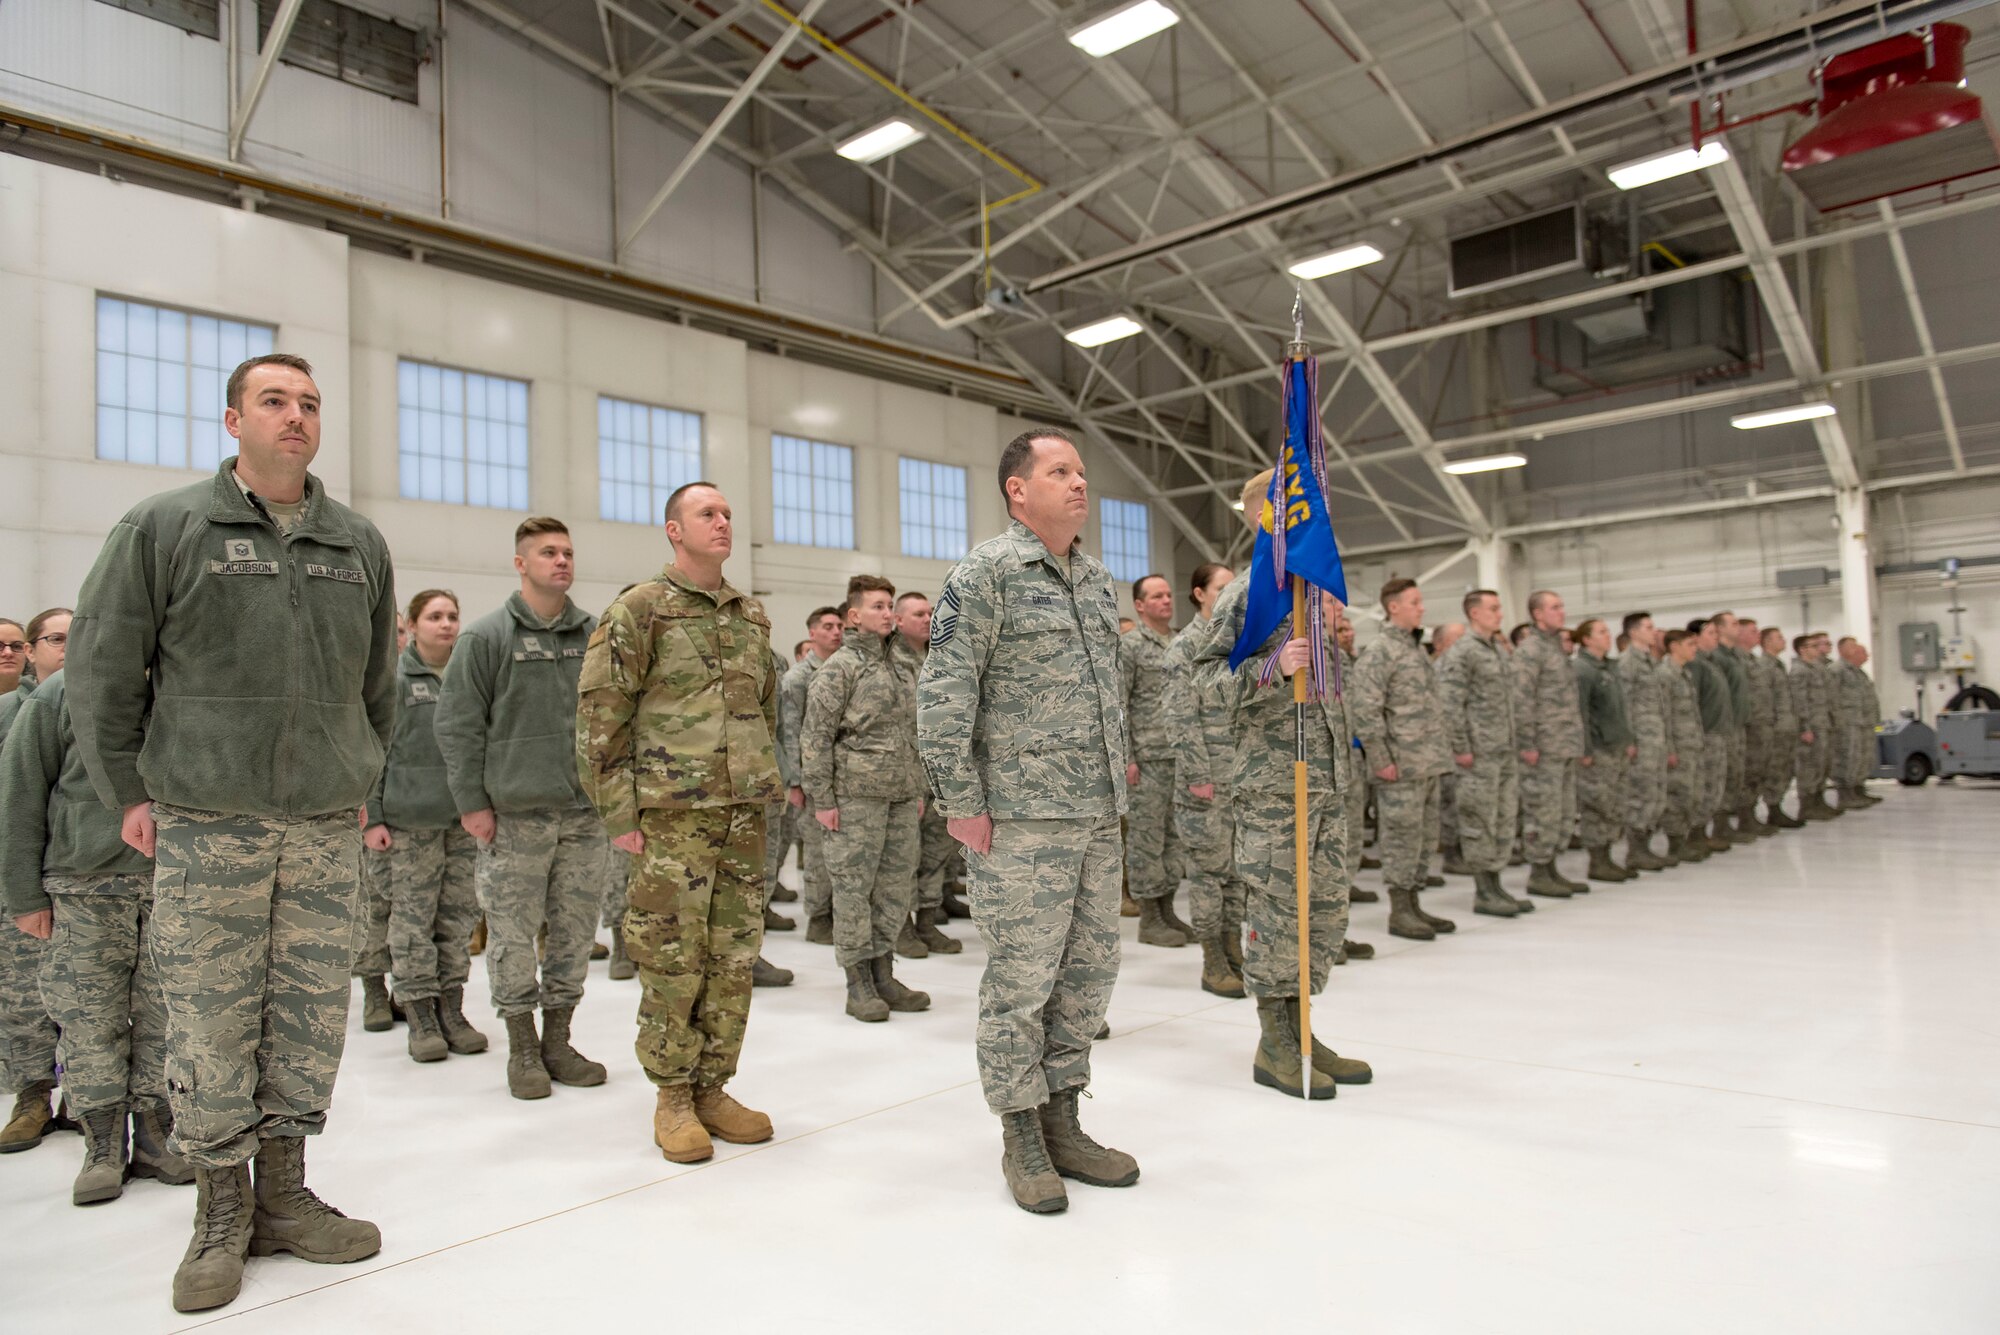 Airmen from the 115th Maintenance Group, Truax Field, Wisconsin, stand in formation during the 115th MXG change of command ceremony December 2, 2018, at the 115th Fighter Wing on Truax. Col. Christopher Green is reliquishing command of the 115th MXG to Lt. Col. Wilhelmina Panzer. (U.S. Air National Guard photo by Airman 1st Class Cameron Lewis)